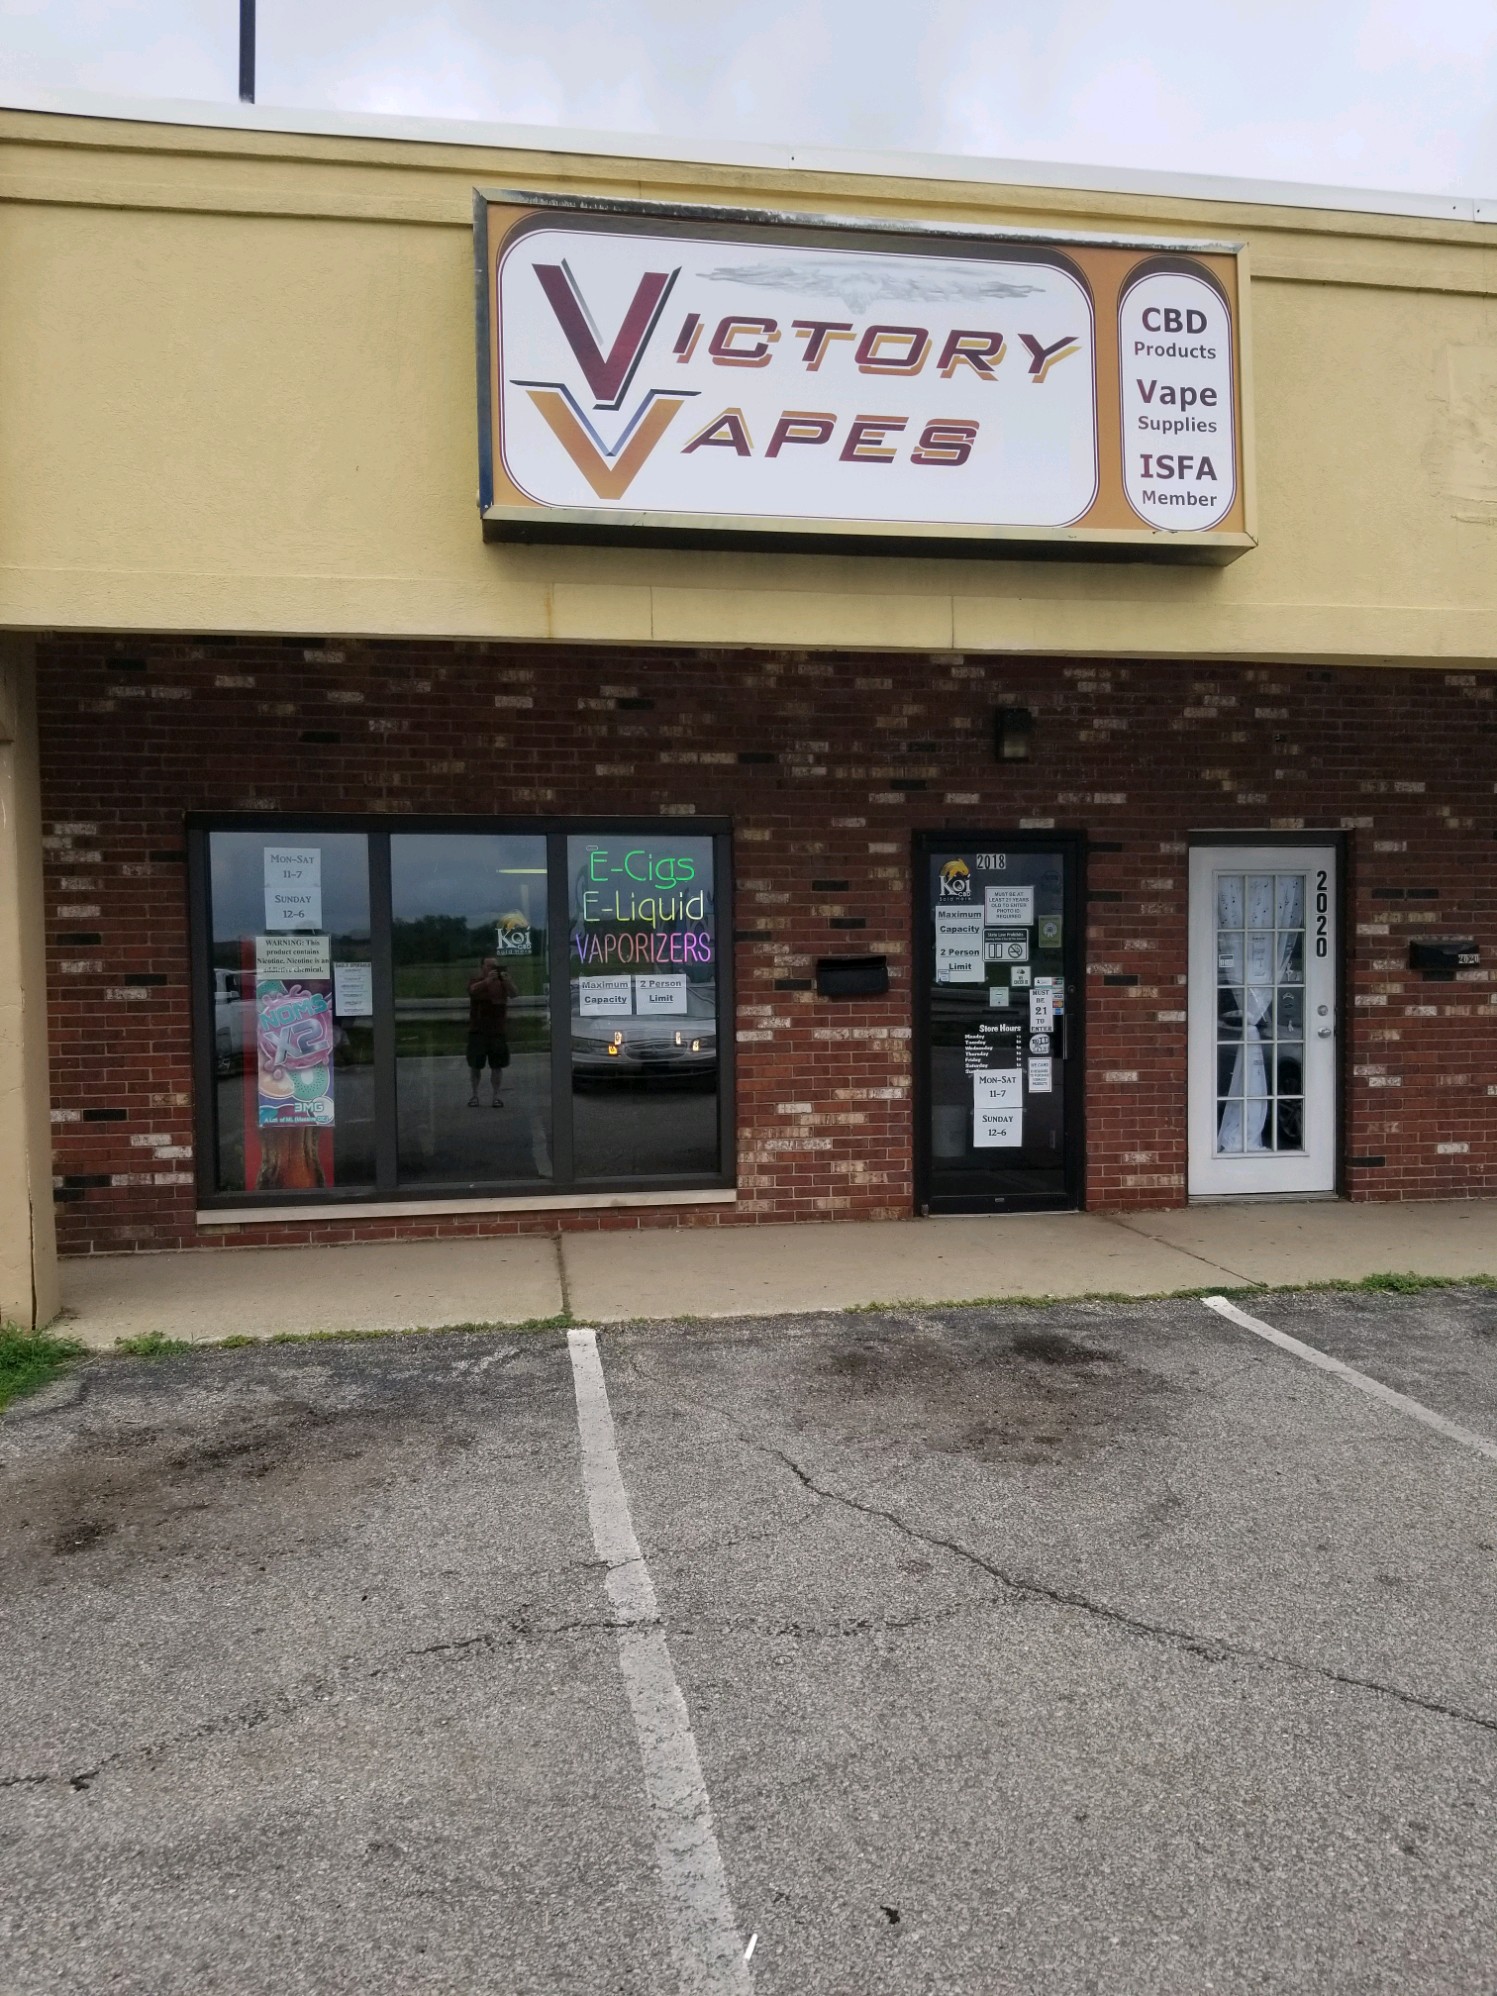 A Picture of Victory Vapes store in Michigan City, Indiana.